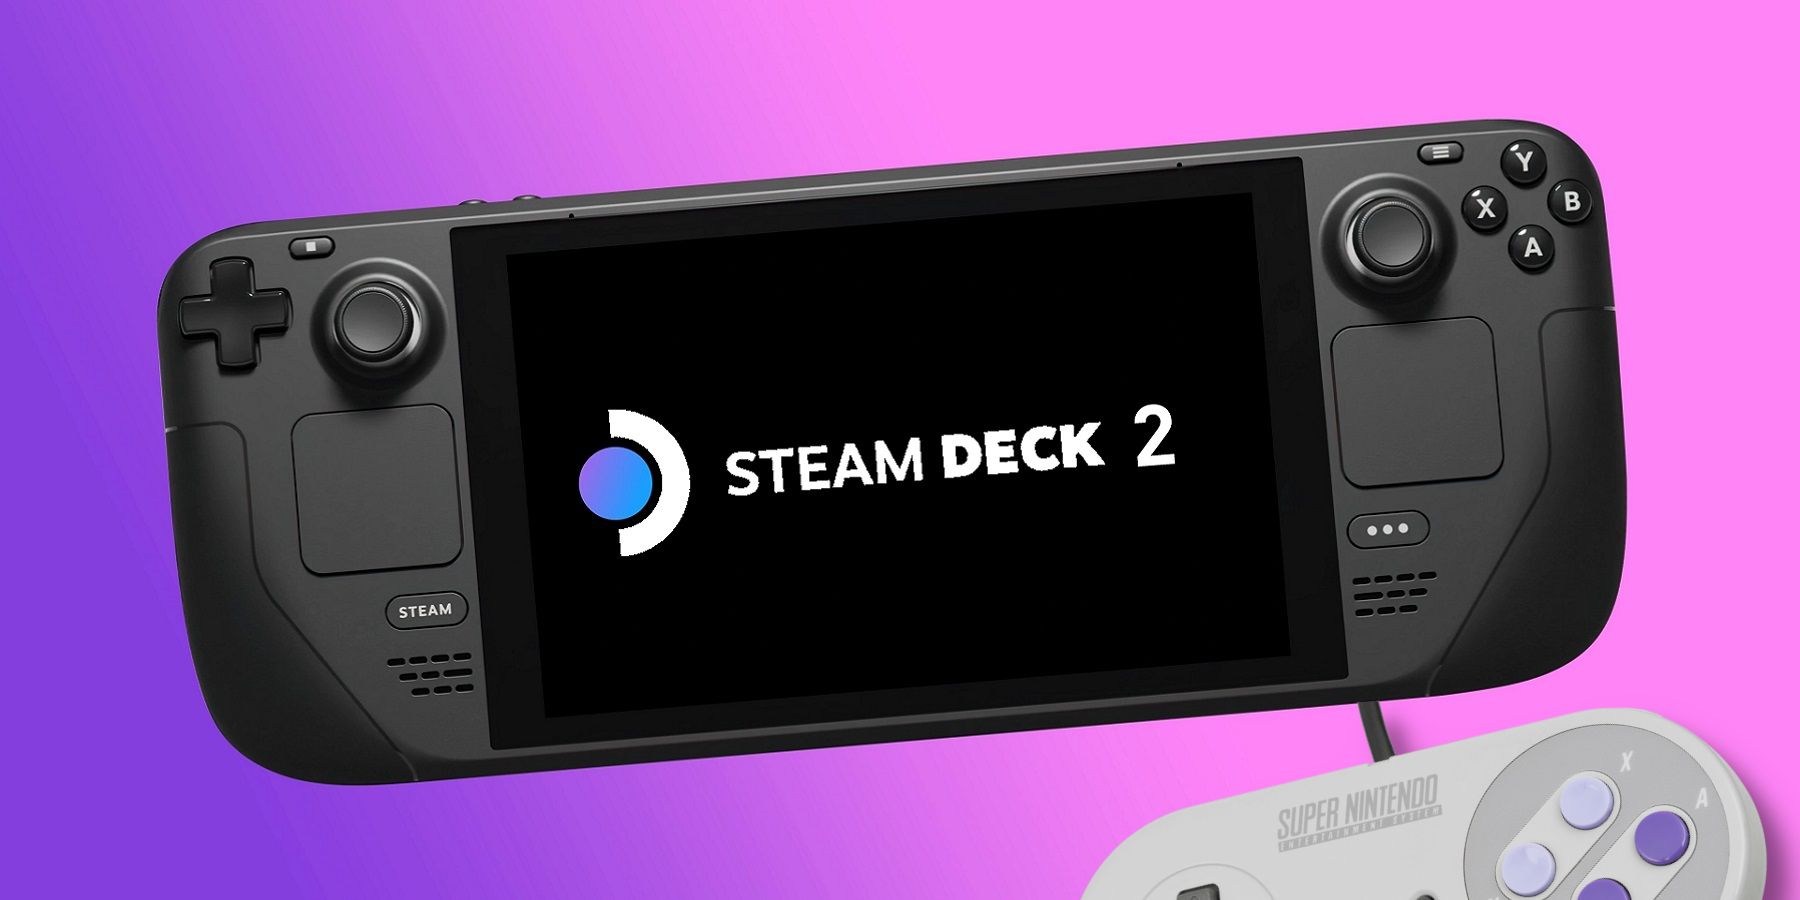 Image of a Steam Deck with a SNES controller attached, all on a purple background.